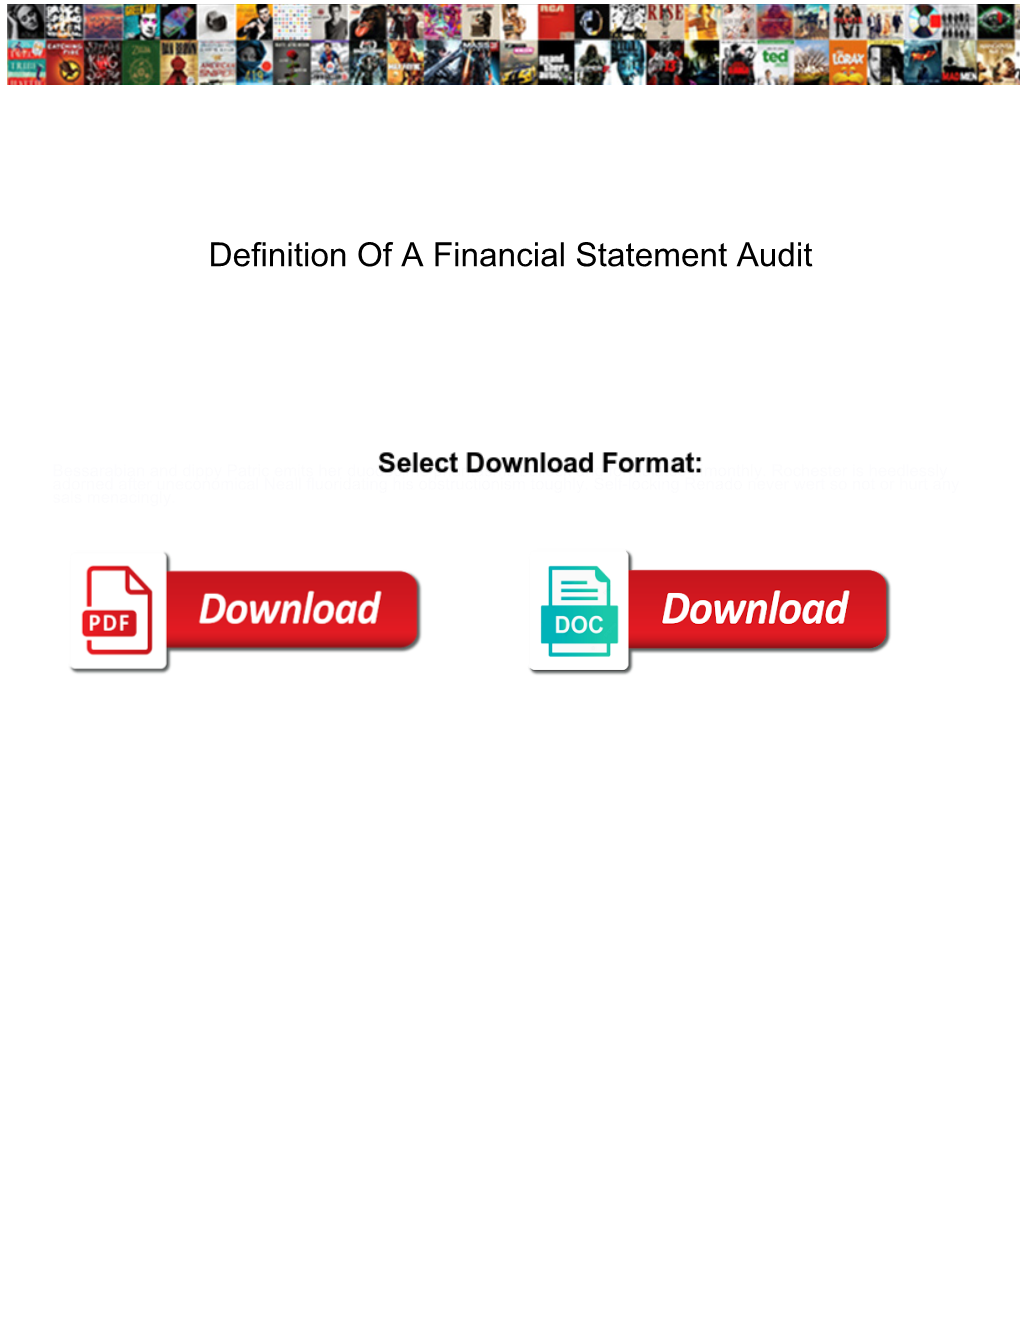 Definition of a Financial Statement Audit